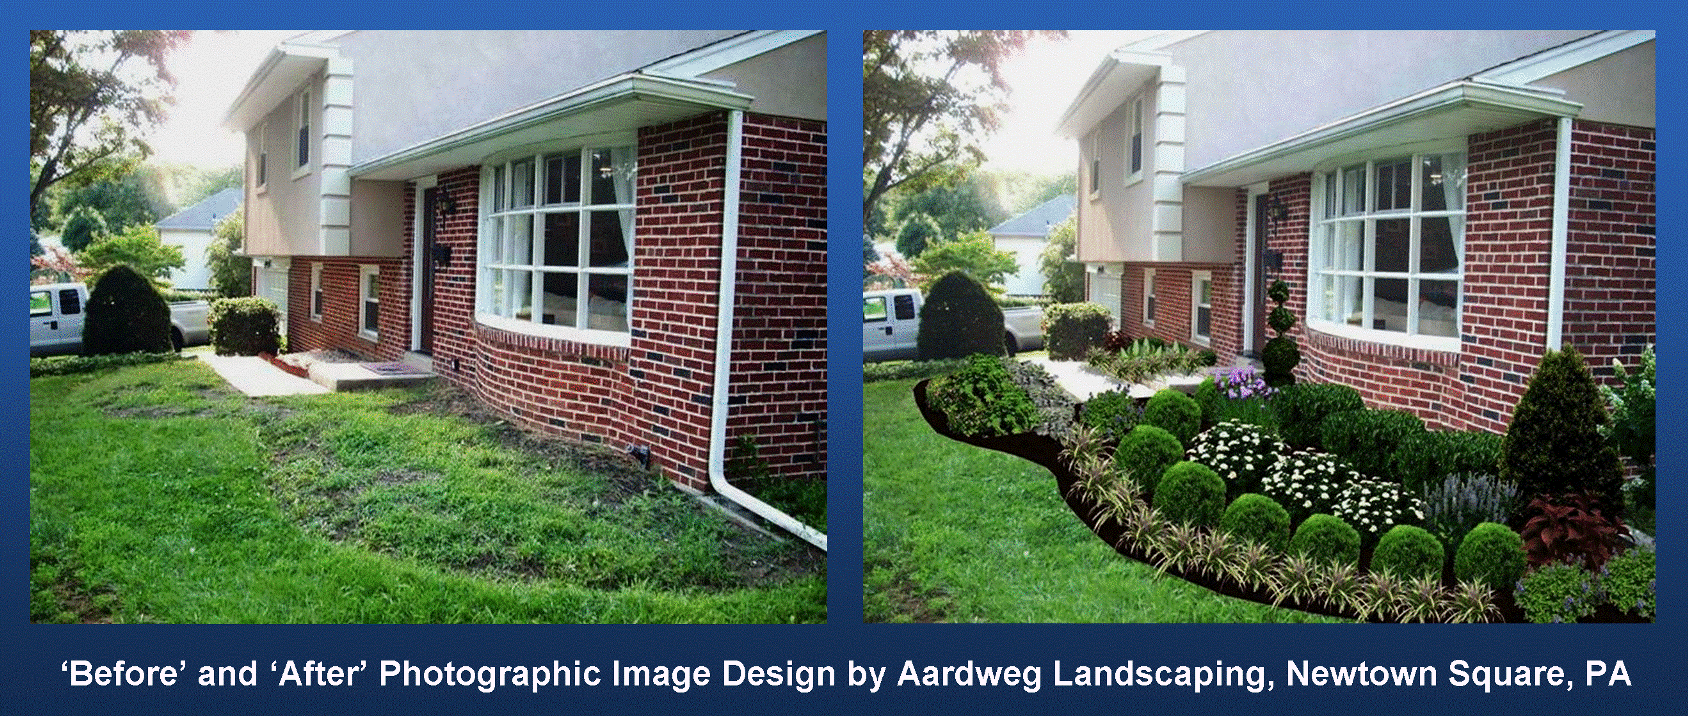 ‘Before’ and ‘After’ Photographic Image Design by Aardweg Landscaping, Newtown Square, PA 2 - Copy